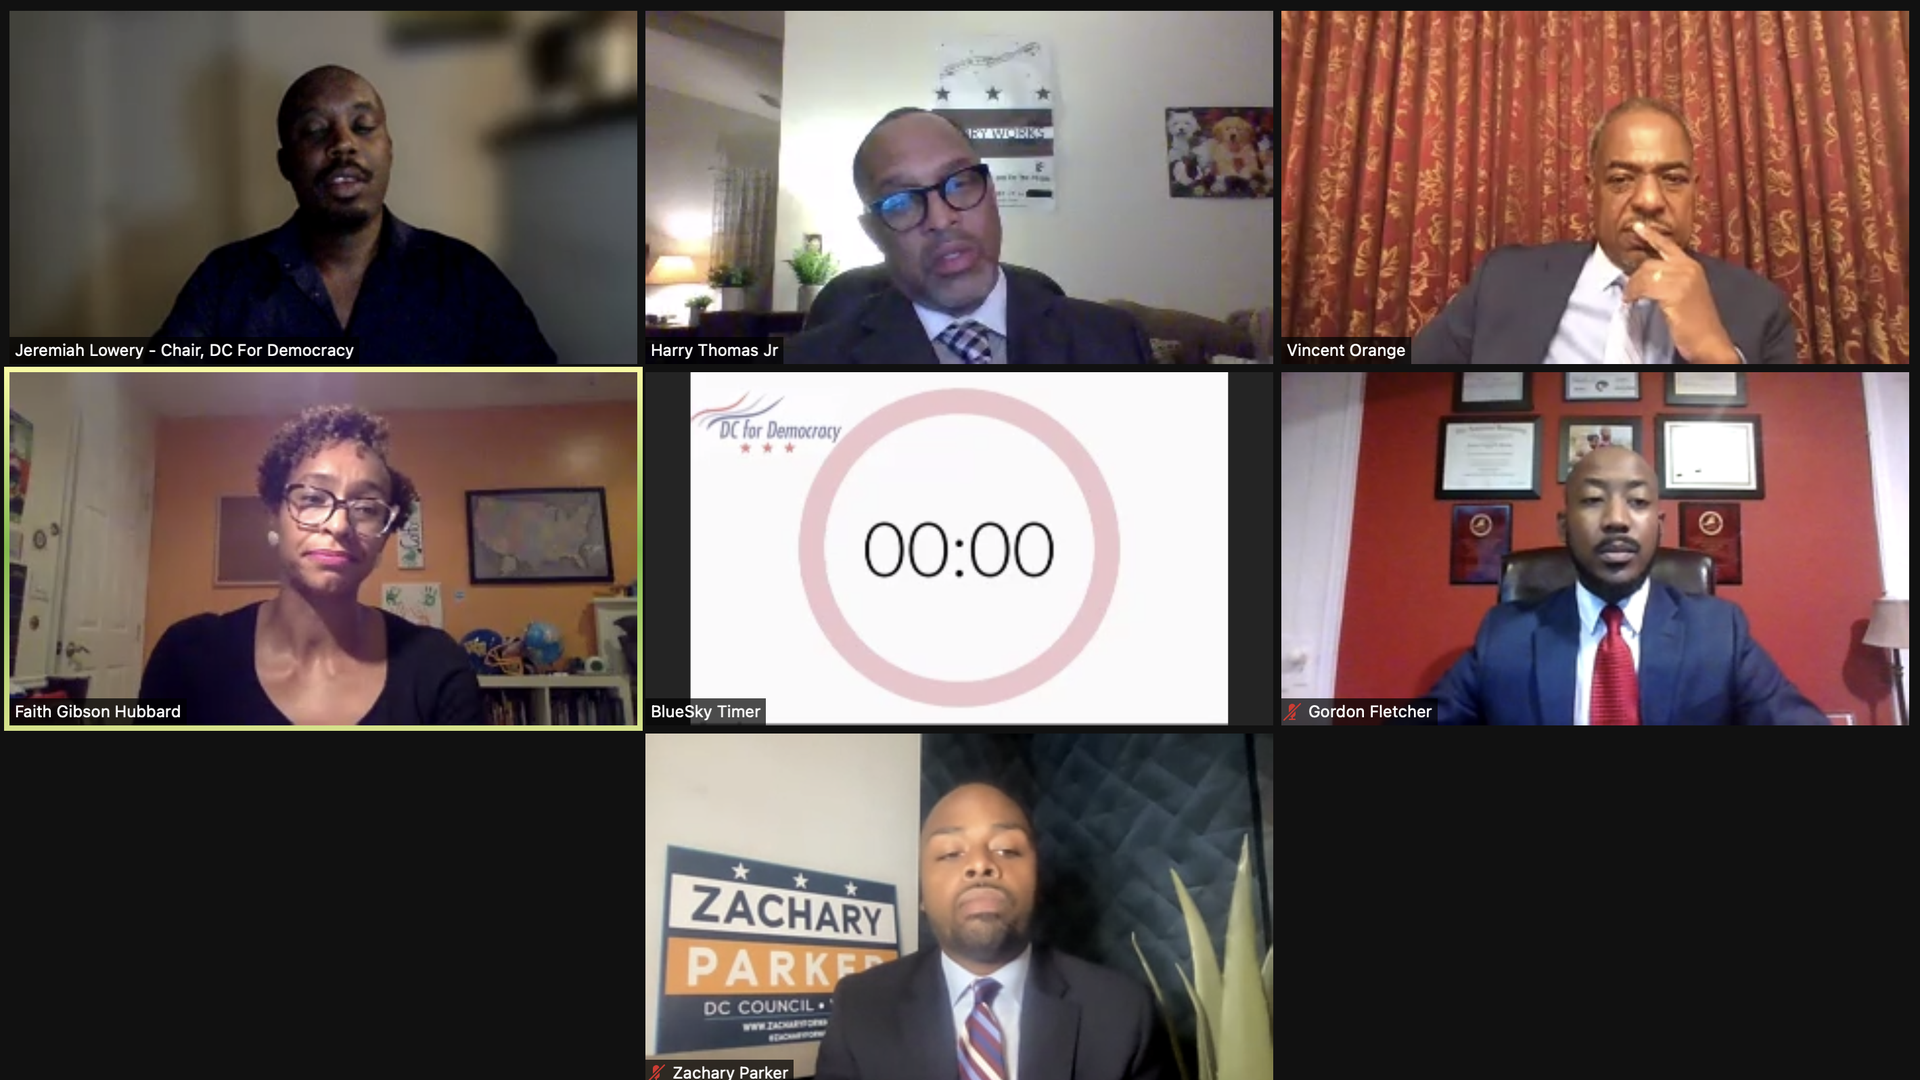 All five candidates for D.C. Council in Ward 5 shown in a screenshot of a debate on Zoom.